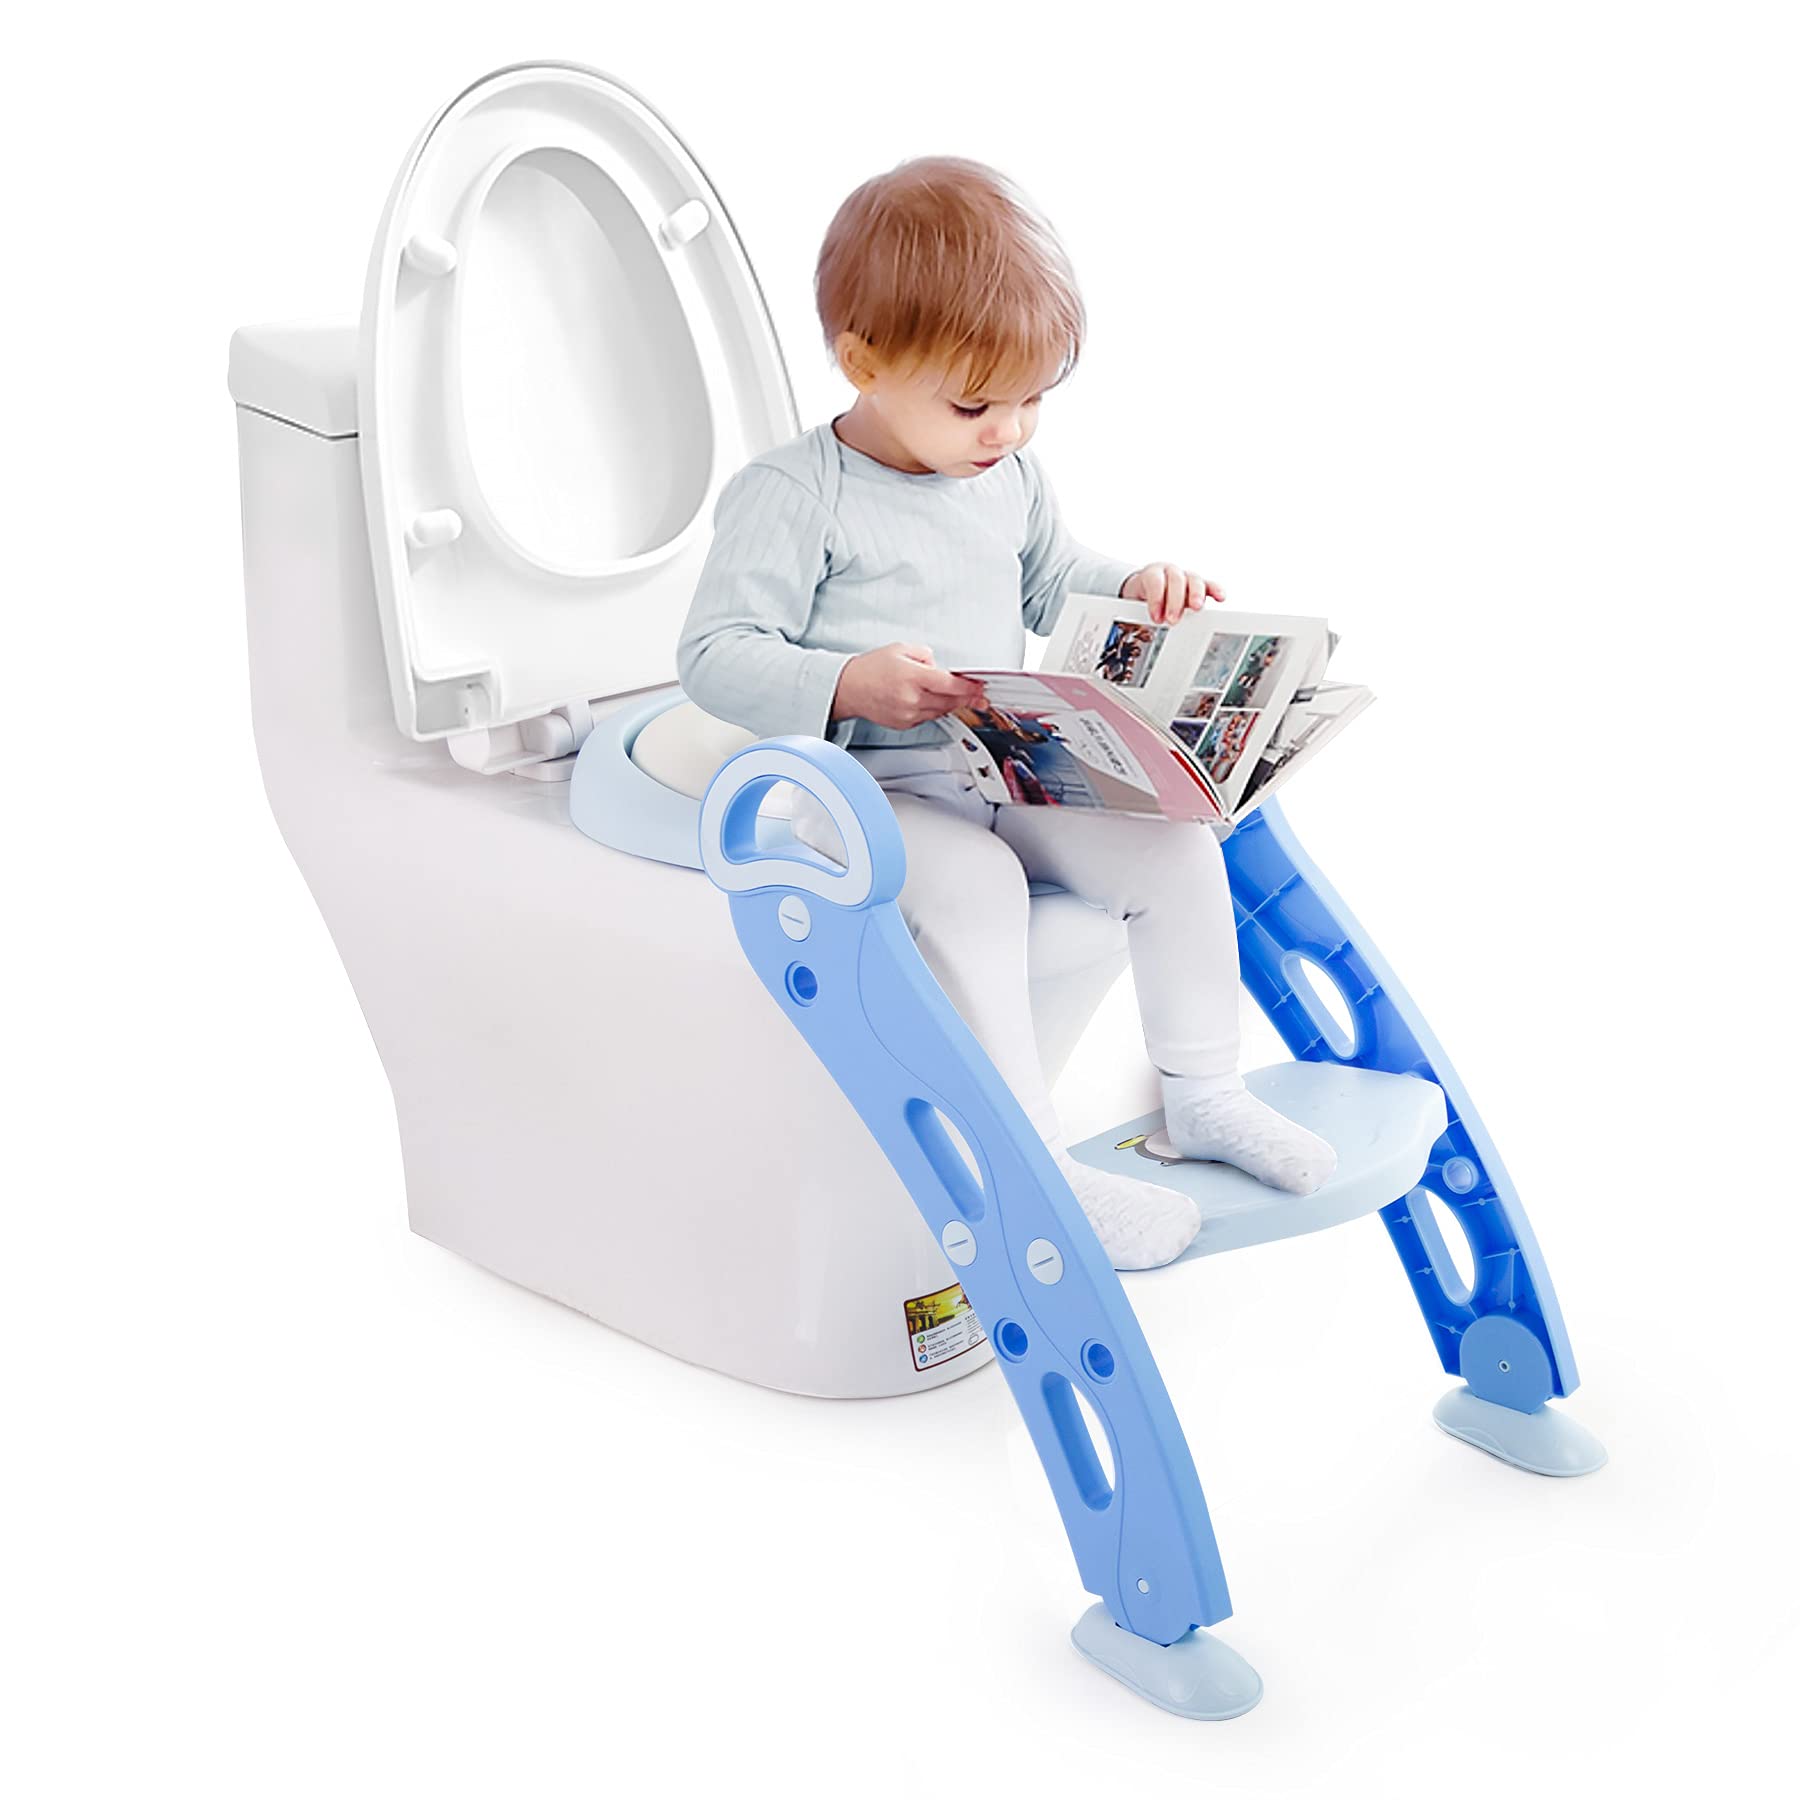 Manufactur standard Silicone Baby Feeder - Baobei Toilet Training Seat with Non-Slip Step Stool Ladder for Toddlers (Blue) – Ealing